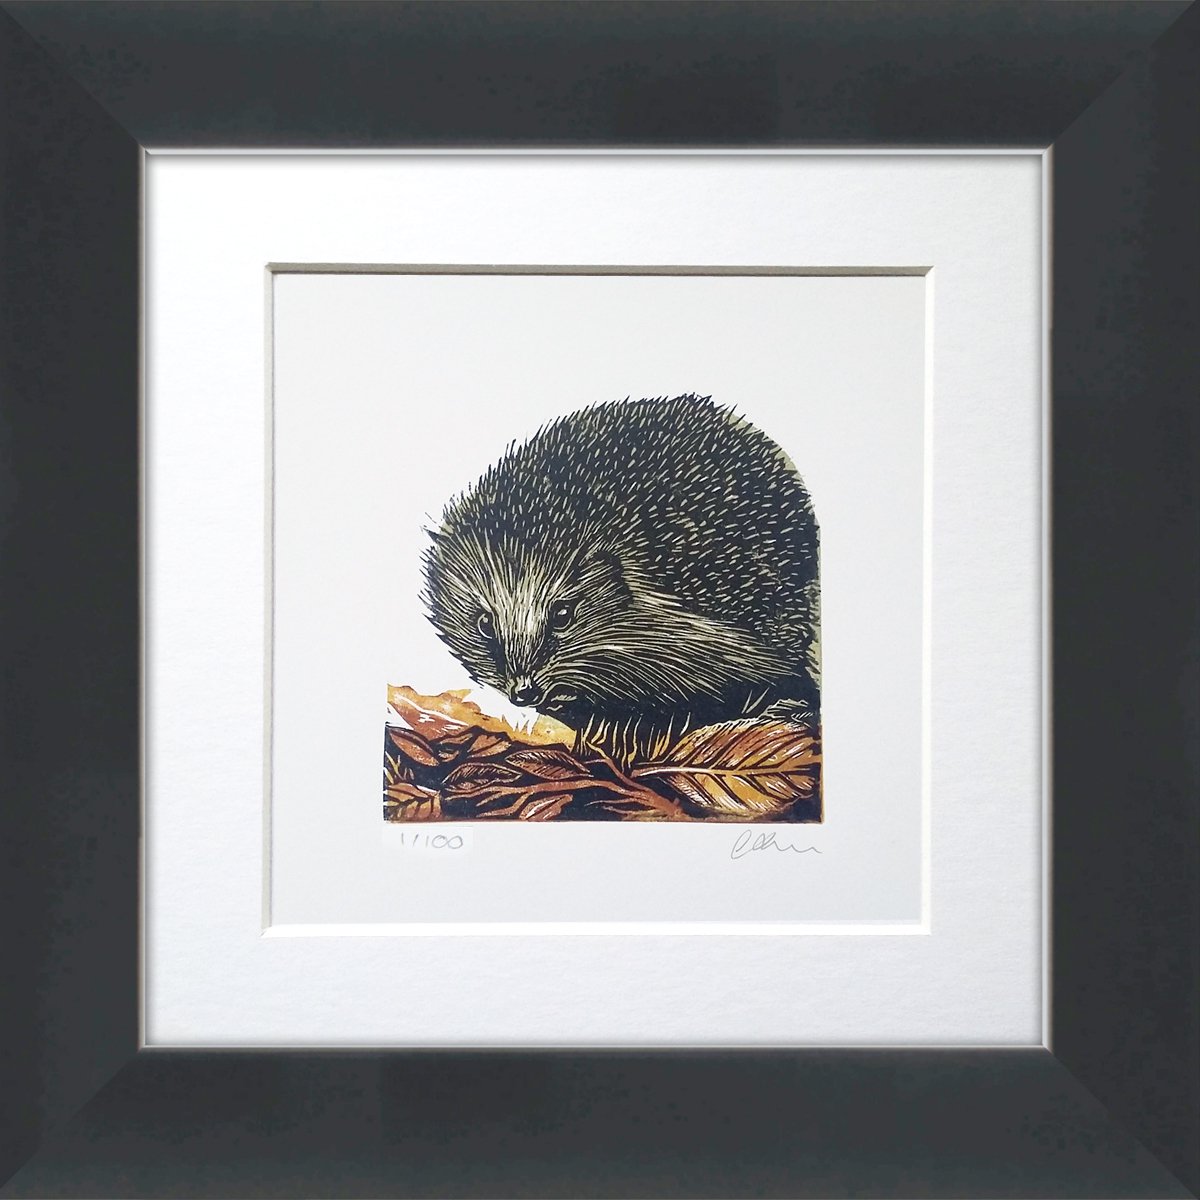 Hedgehog - linocut print framed and ready to hang by Carolynne Coulson